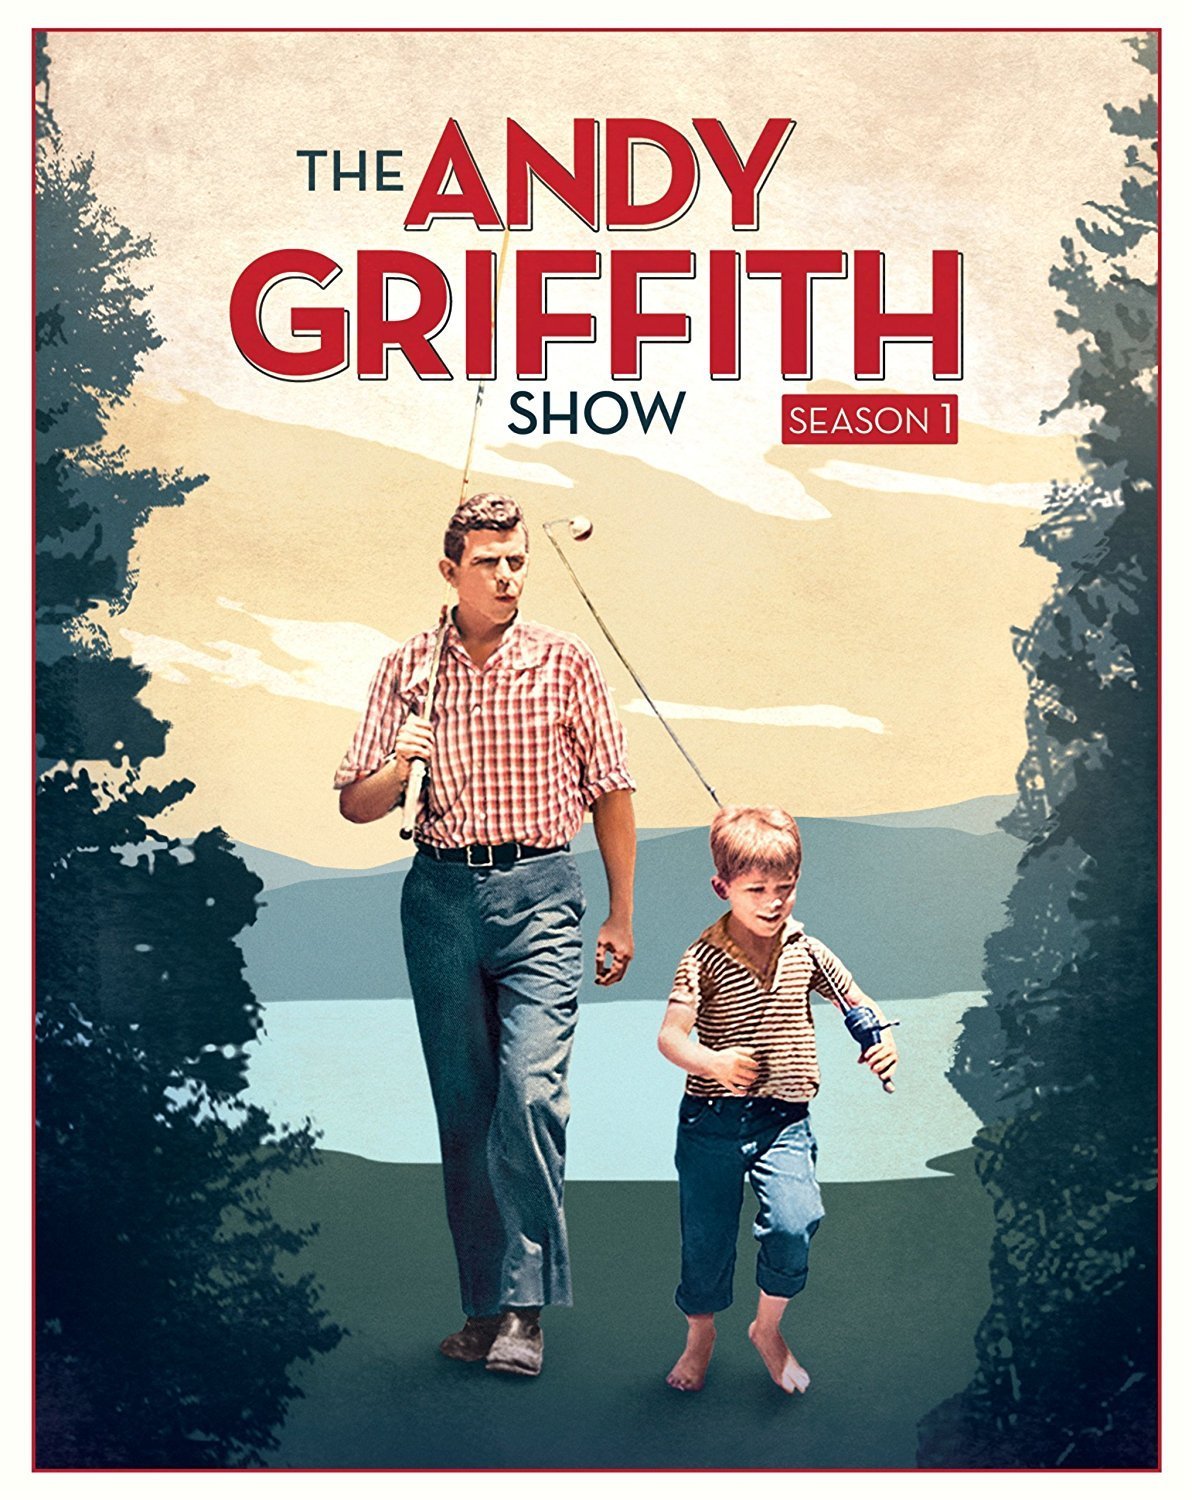 Promotional poster for "The Andy Griffith Show." | Source: Shutterstock